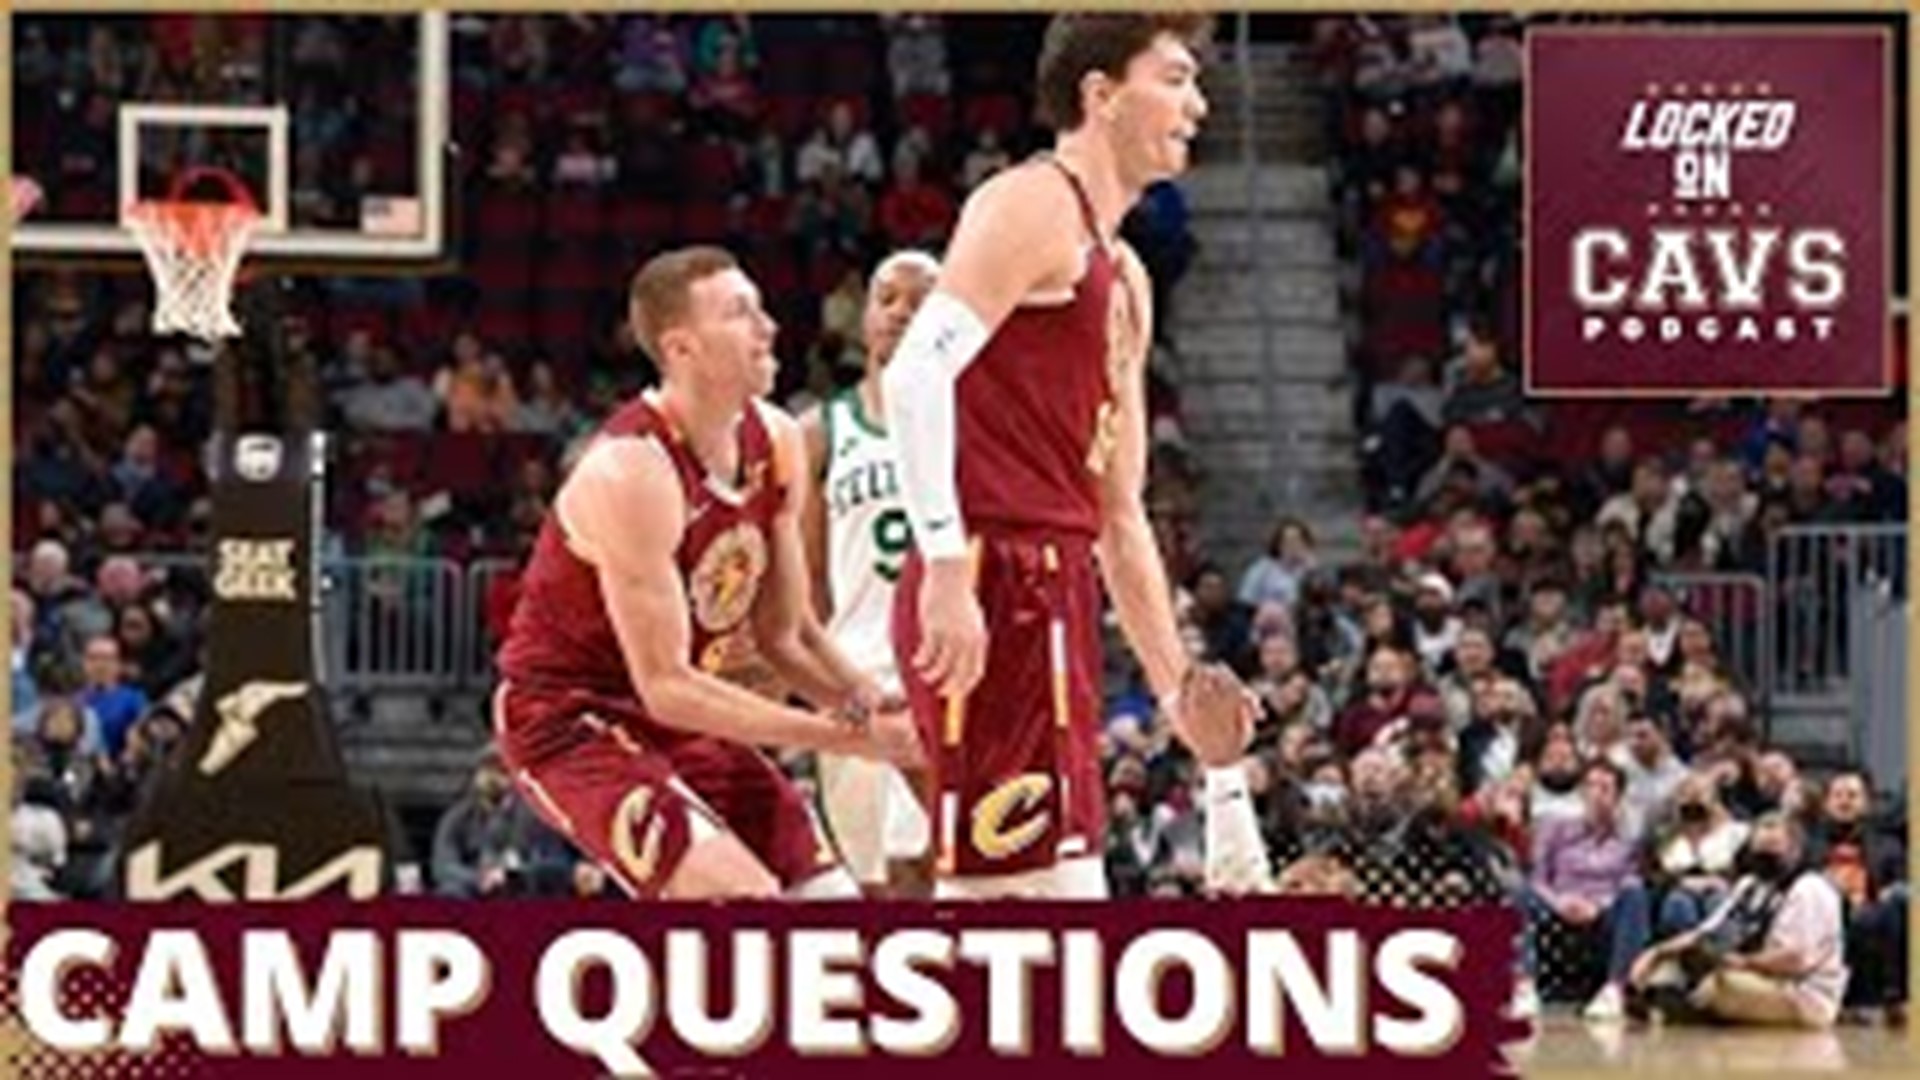 On a new episode of Locked on Cavs, we answer a few training camp questions, including how the defensive scheme changes with Donovan Mitchell in tow.